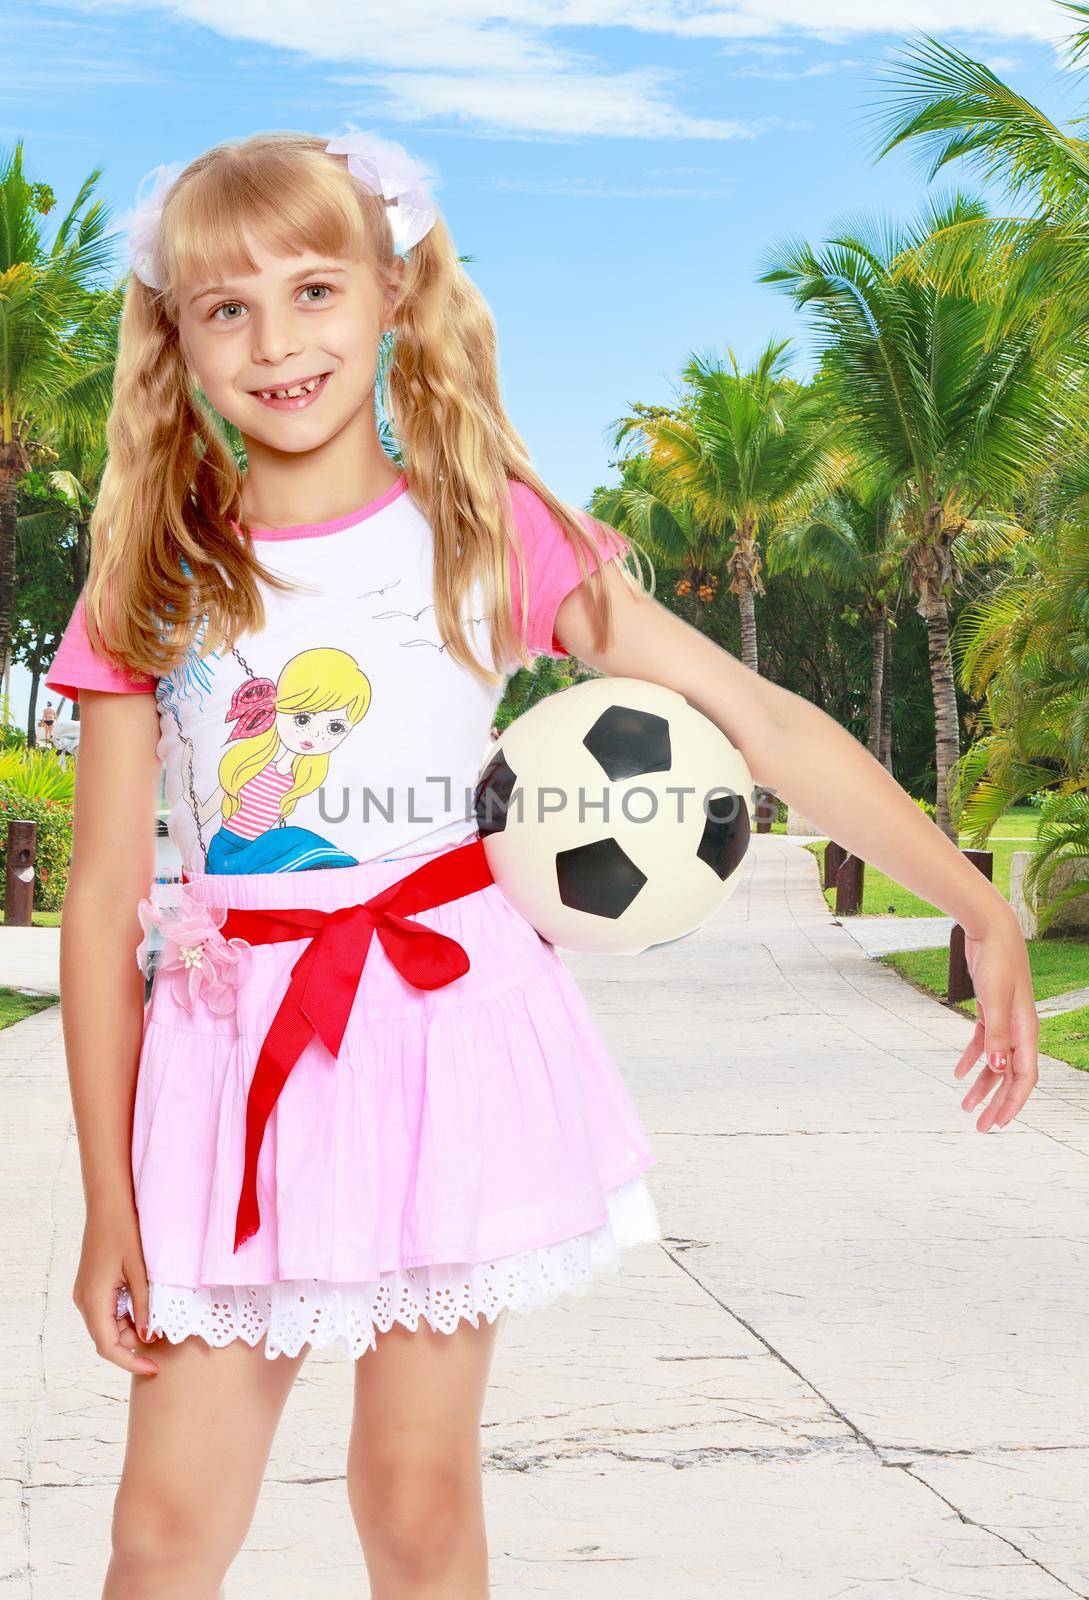 Close-up.Funny little blonde girl in a short pink skirt, holding a hand soccer ball.On the background of the road, palm trees and blue sky with clouds.